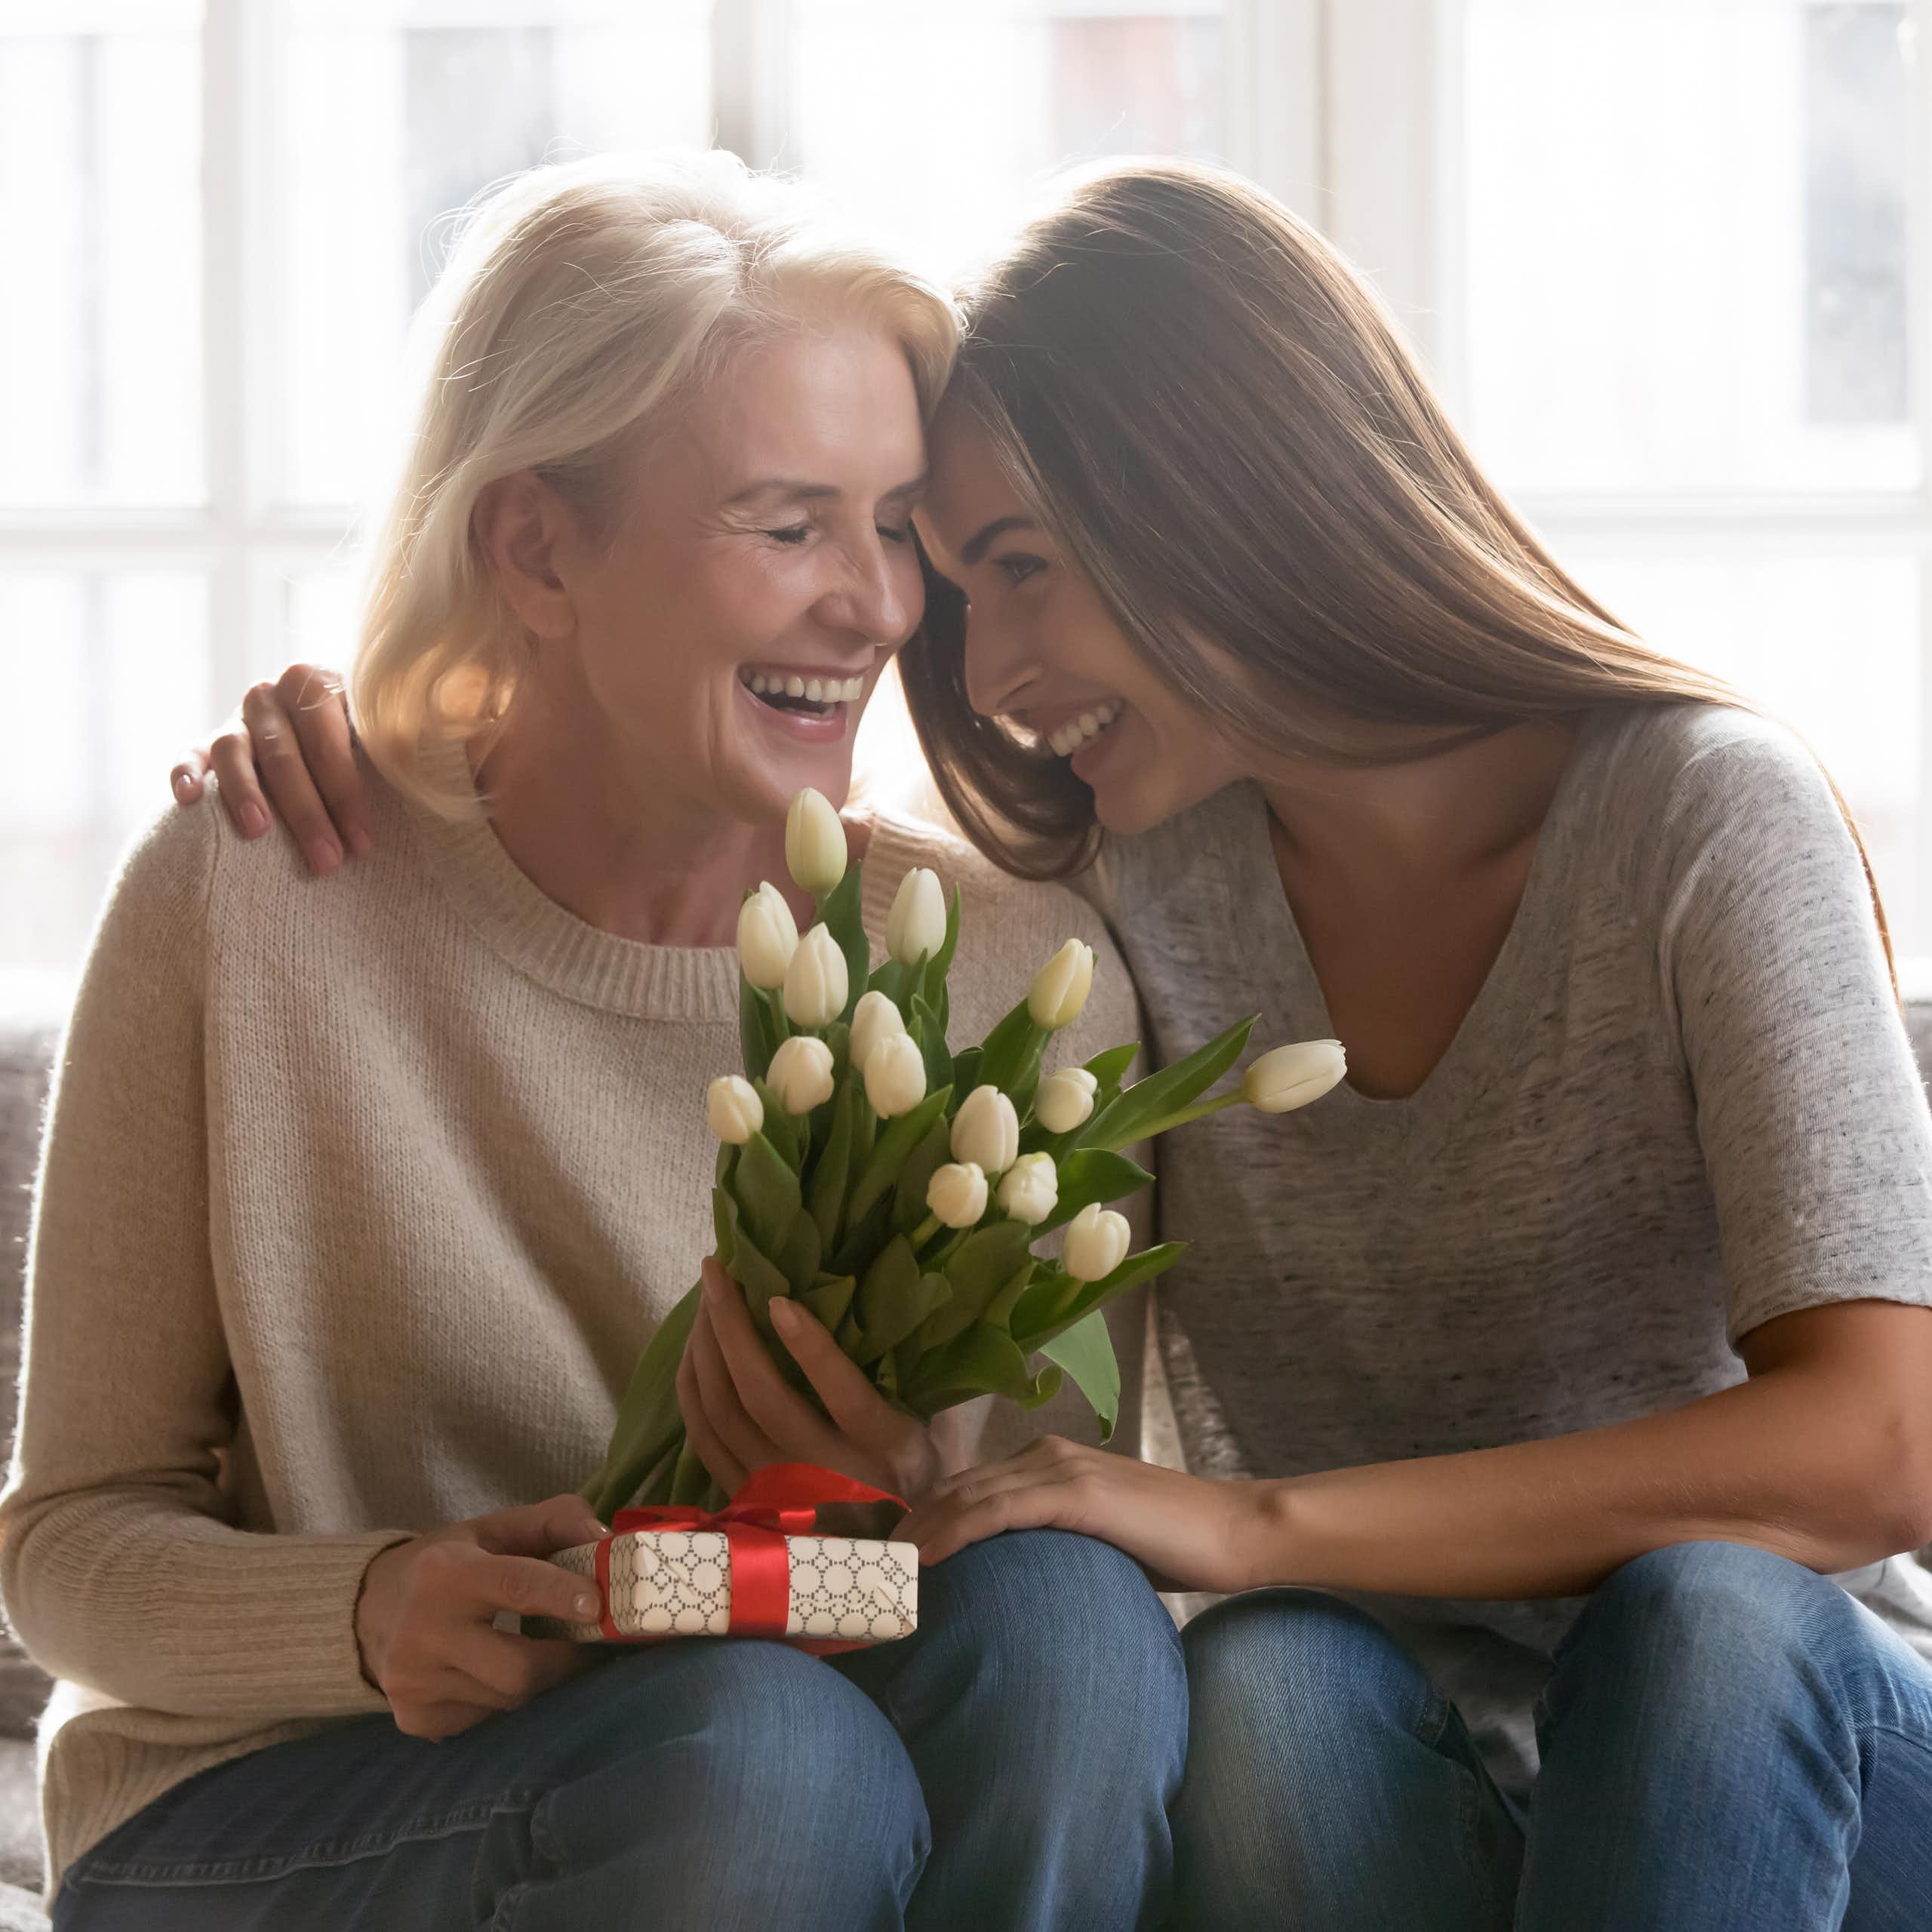 An older woman and her adult daughter smile and embrace on a sofa, the mother is holding a bouquet of white tulips and a wrapped gift